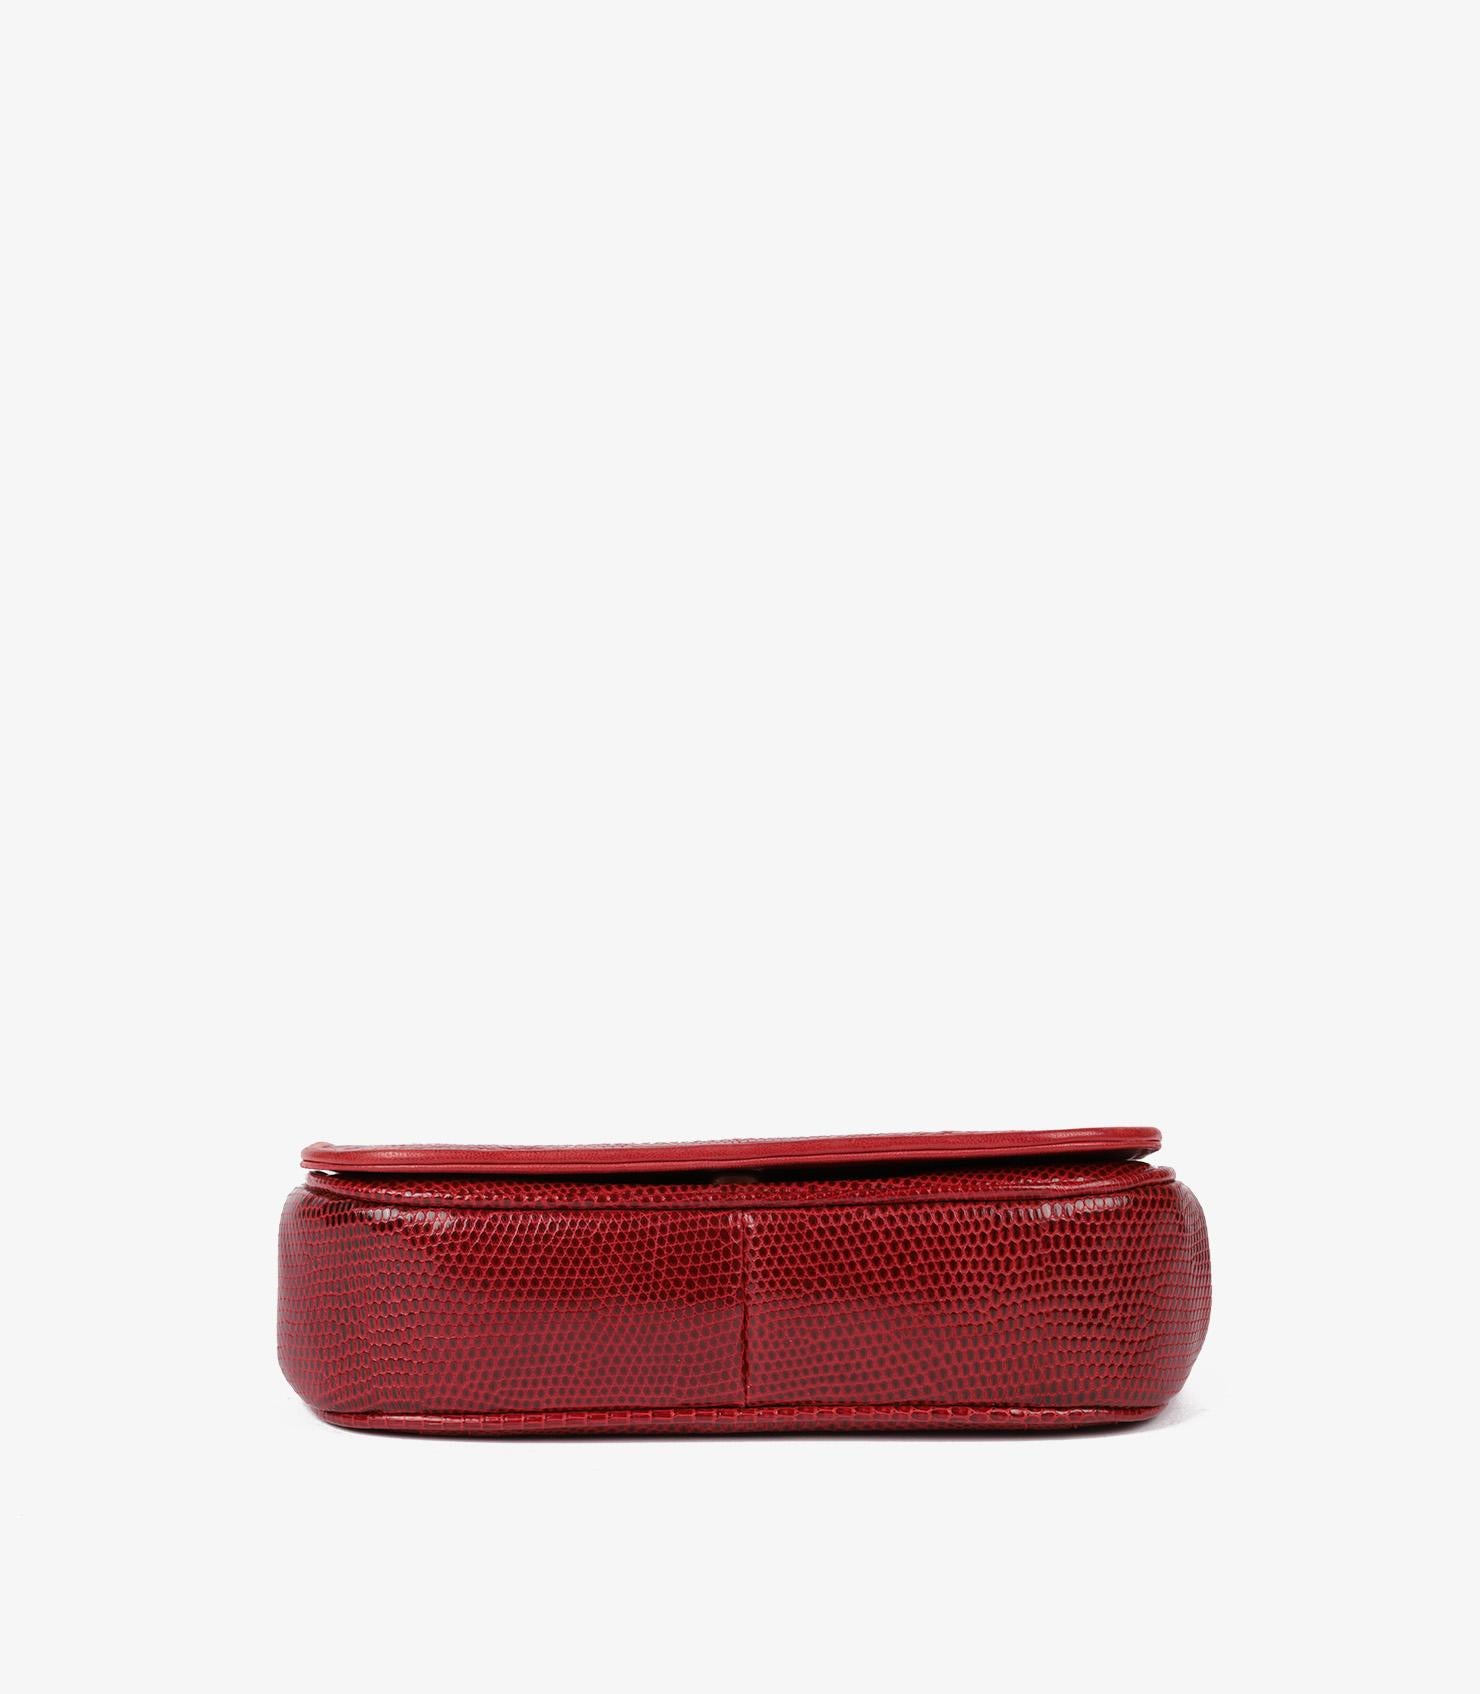 Chanel Red Lizard Leather Vintage Timeless Mini Flap Bag 2